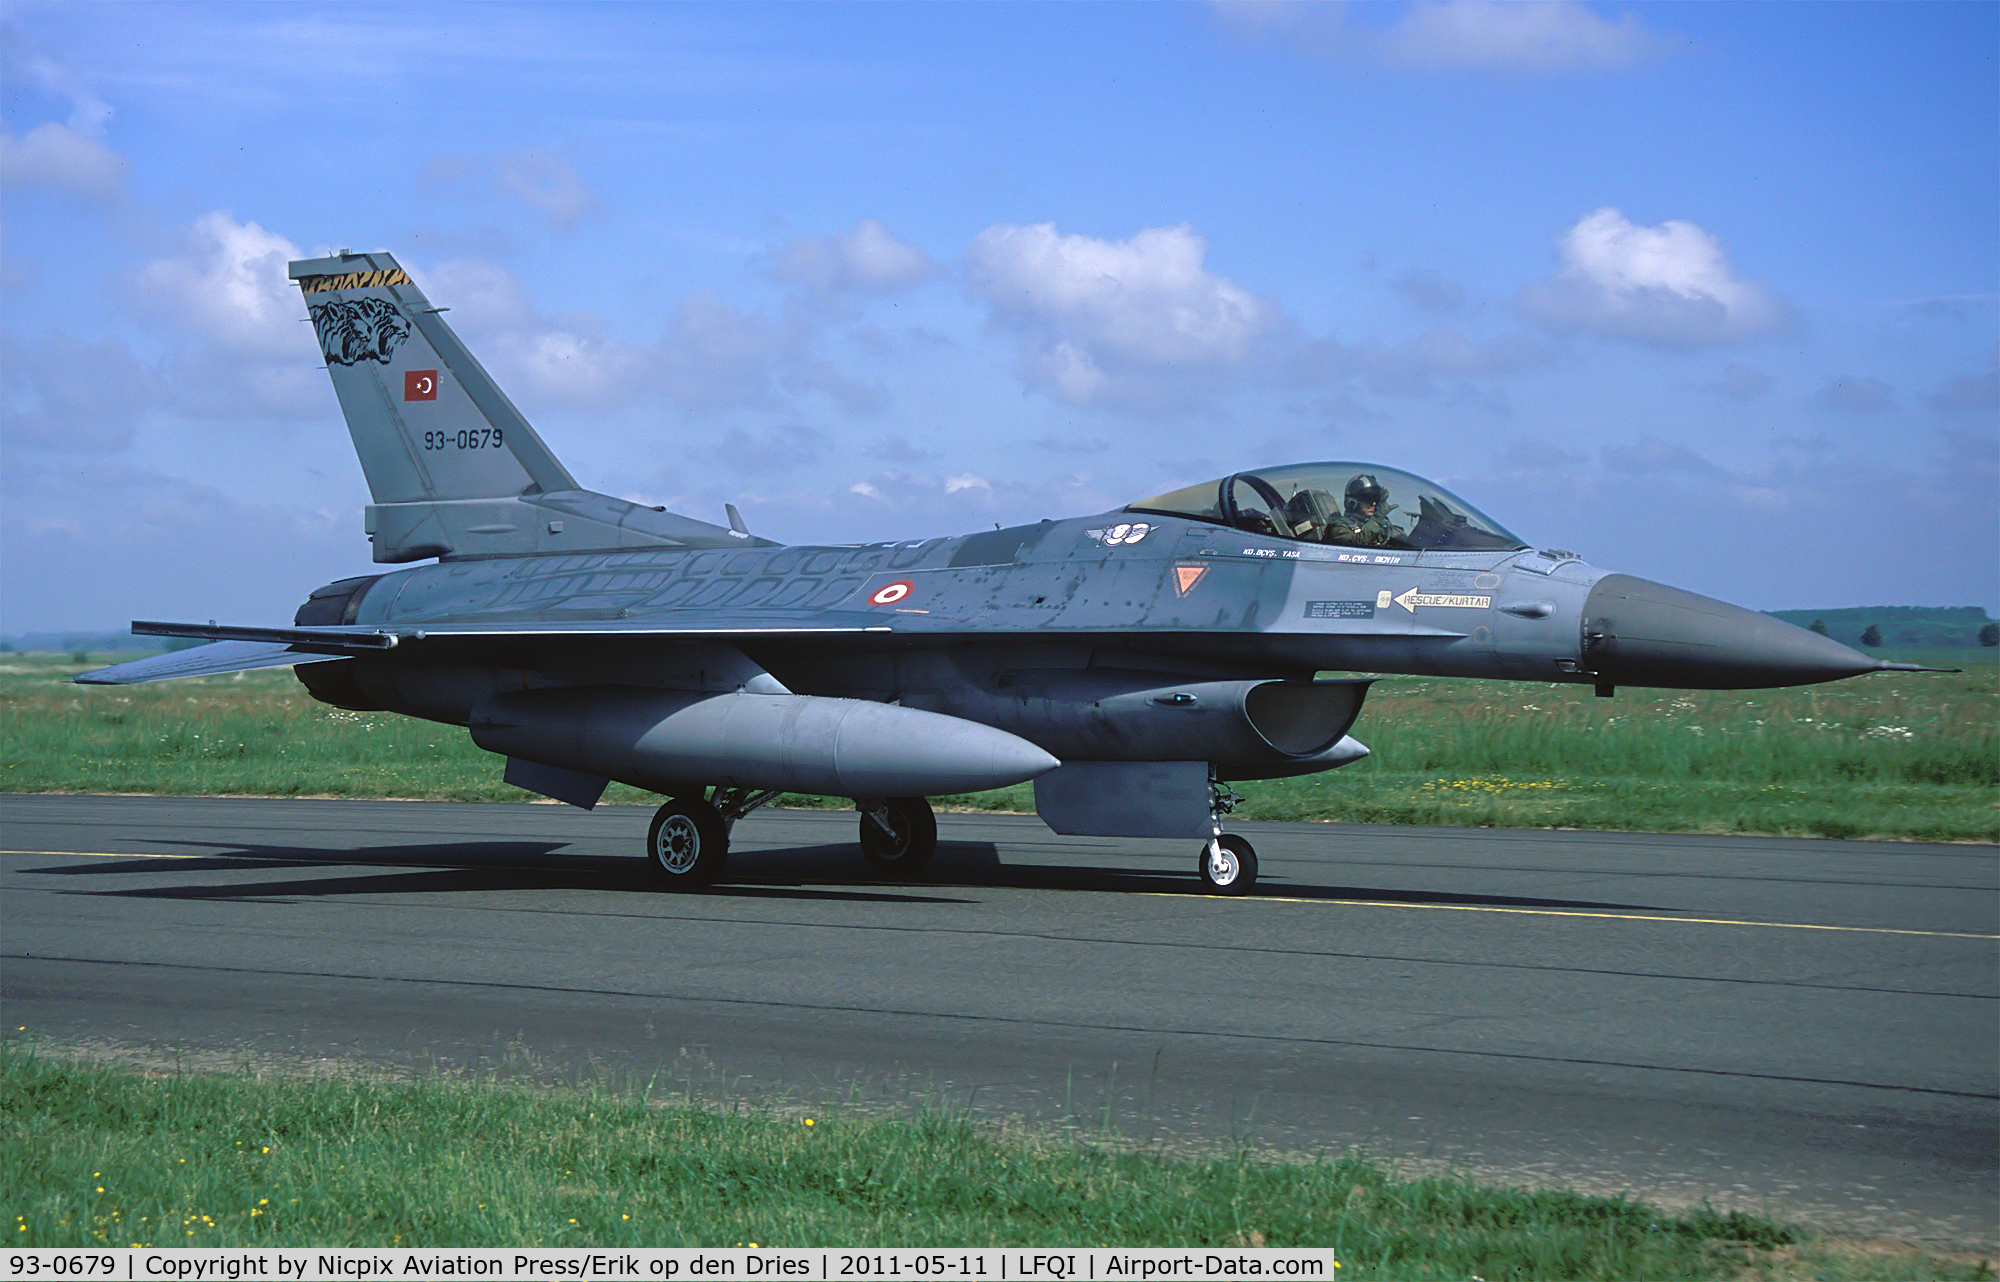 93-0679, TAI (Turkish Aerospace Industries) F-16C Fighting Falcon C/N HC-23, 93-0679 is a Turkish AF F-16C and was sent also to Cambrai AB for the 50th anniversary of the NATO Tigermeet.